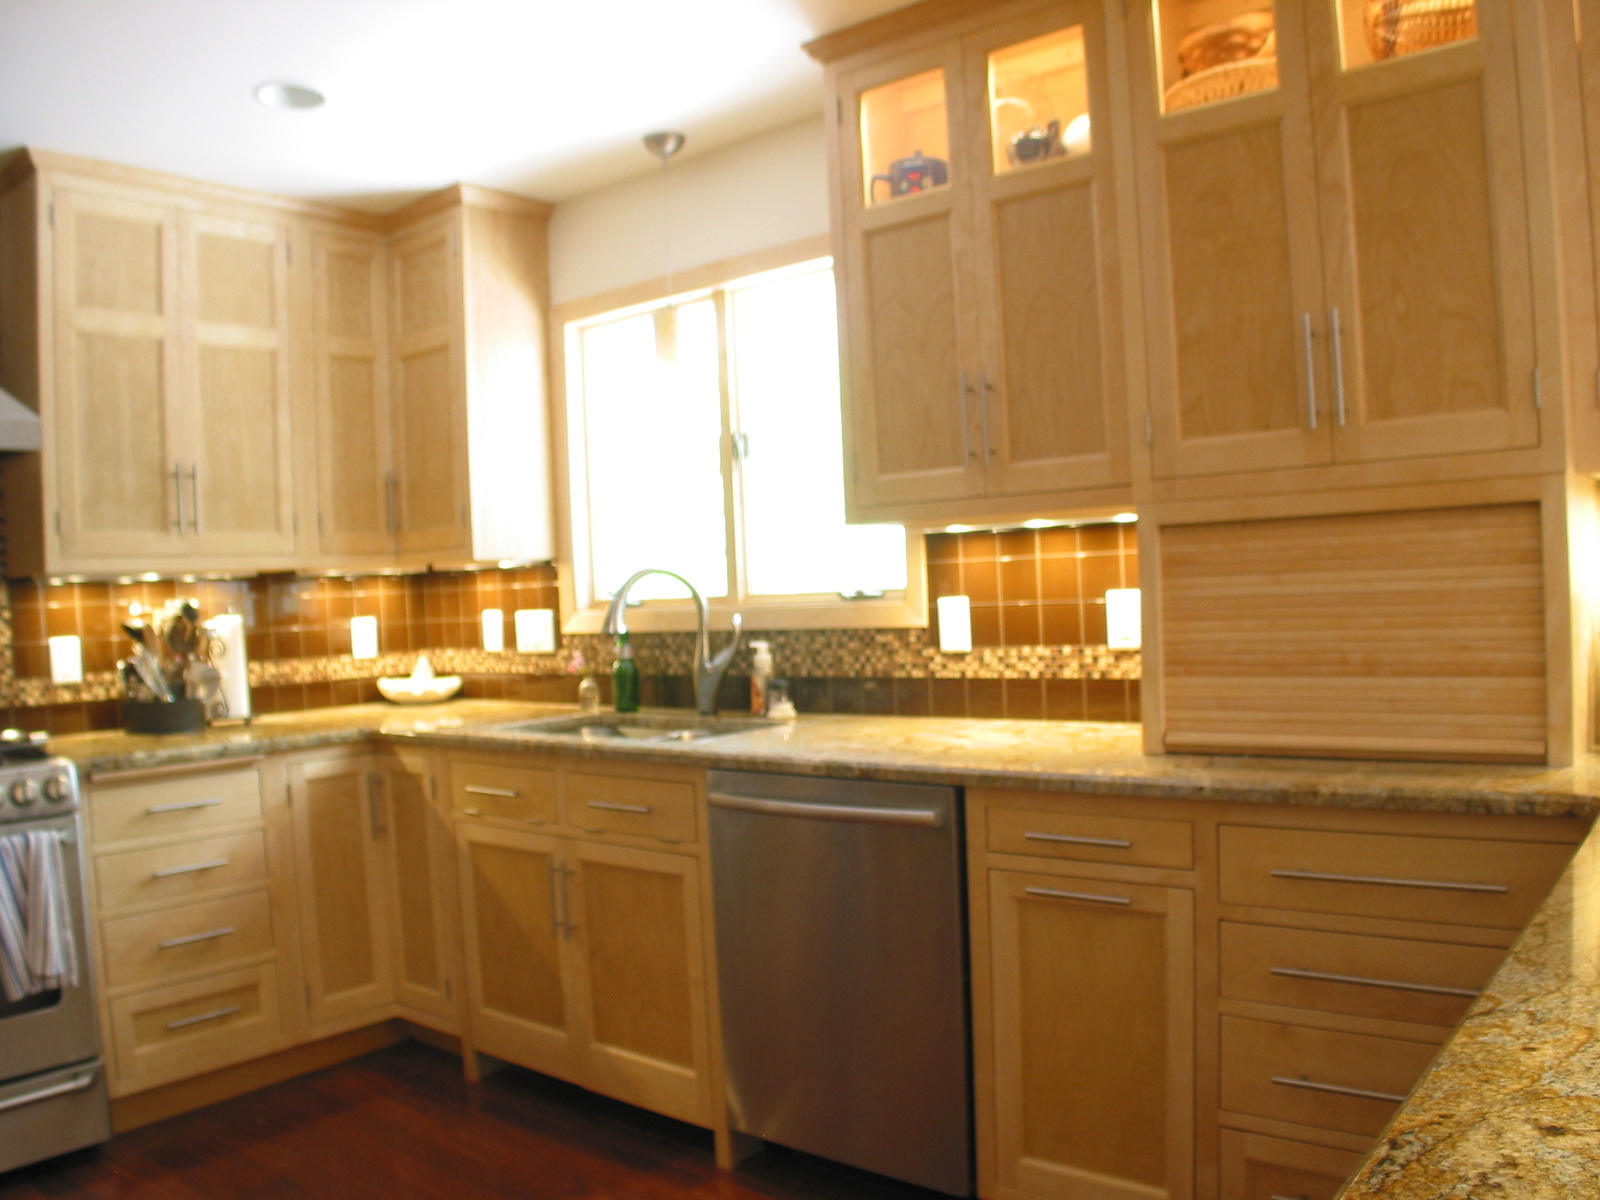 Custom cabinetry and kitchen remodel by Whole Builders